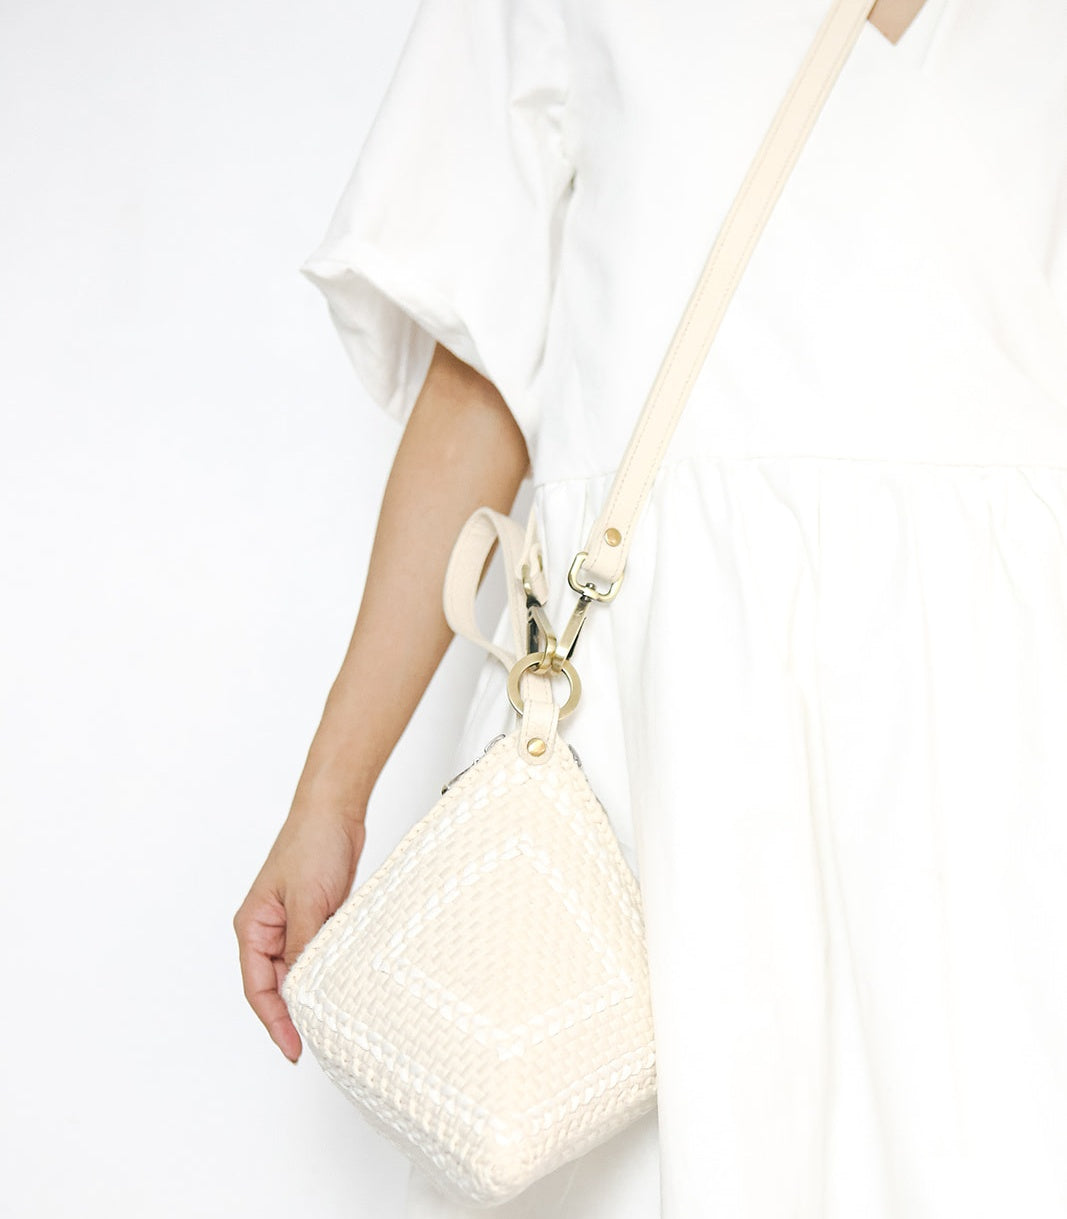 Puso Pyramid Handbag with a model - Beige - Rags2Riches